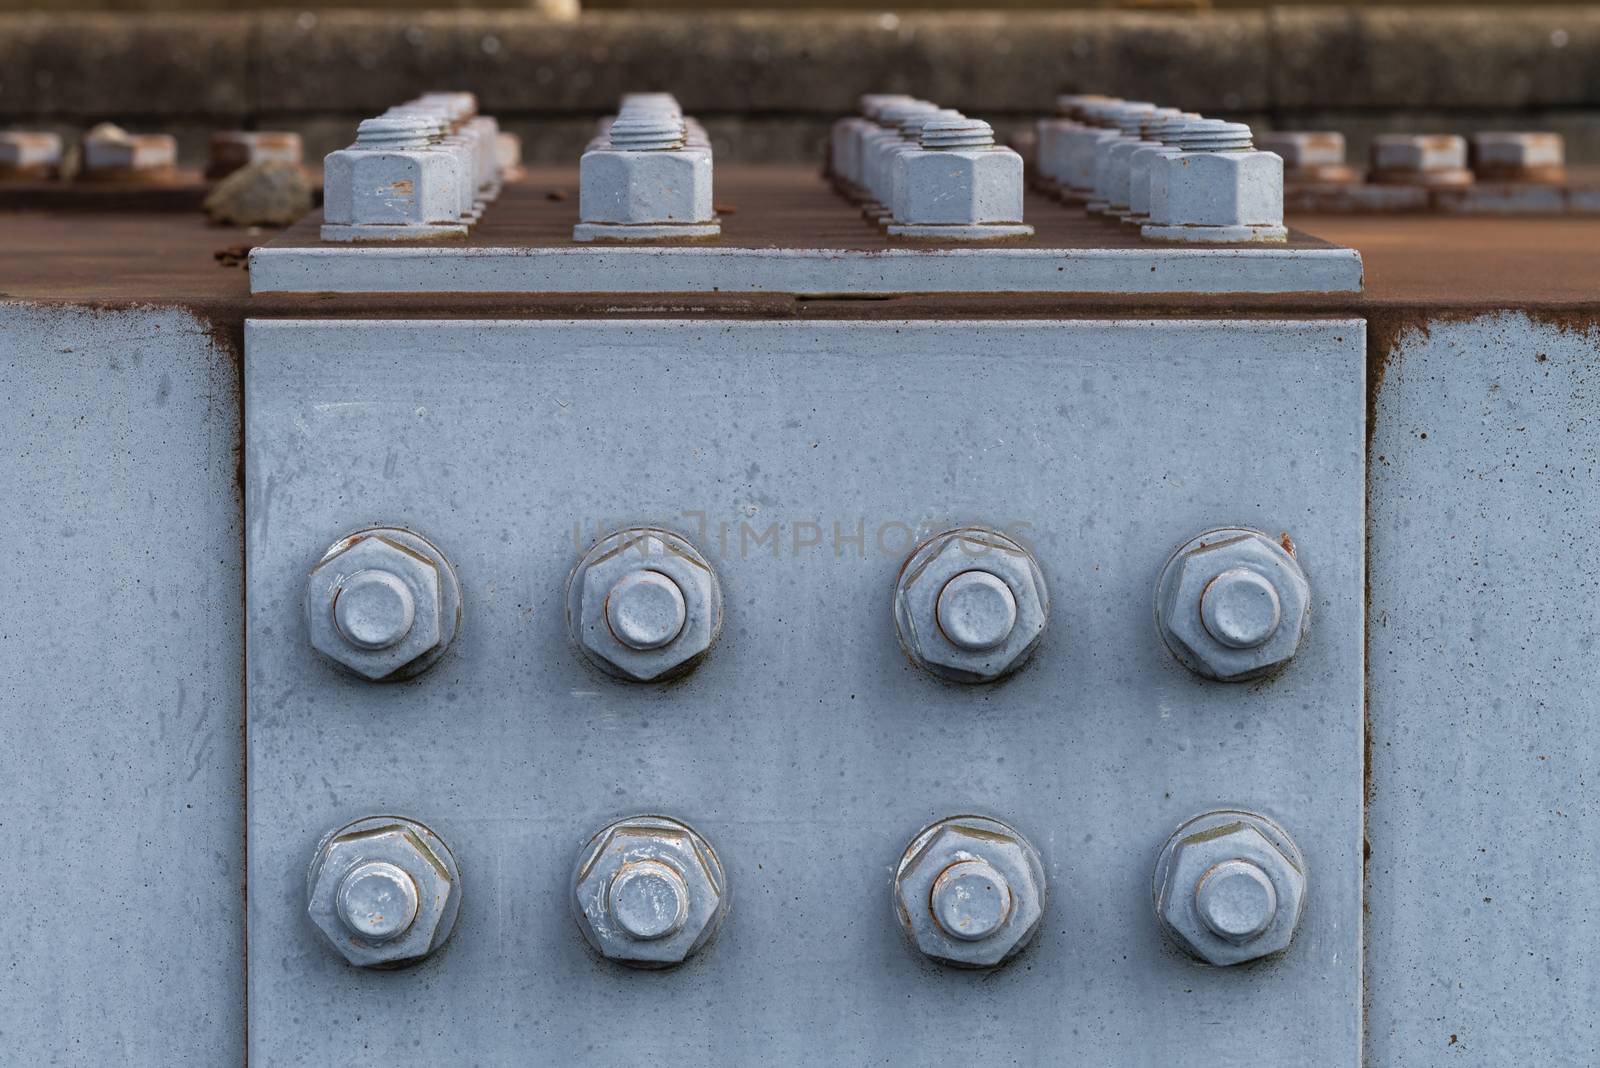 A close up of rusted nuts and bolts on a metal bridge.